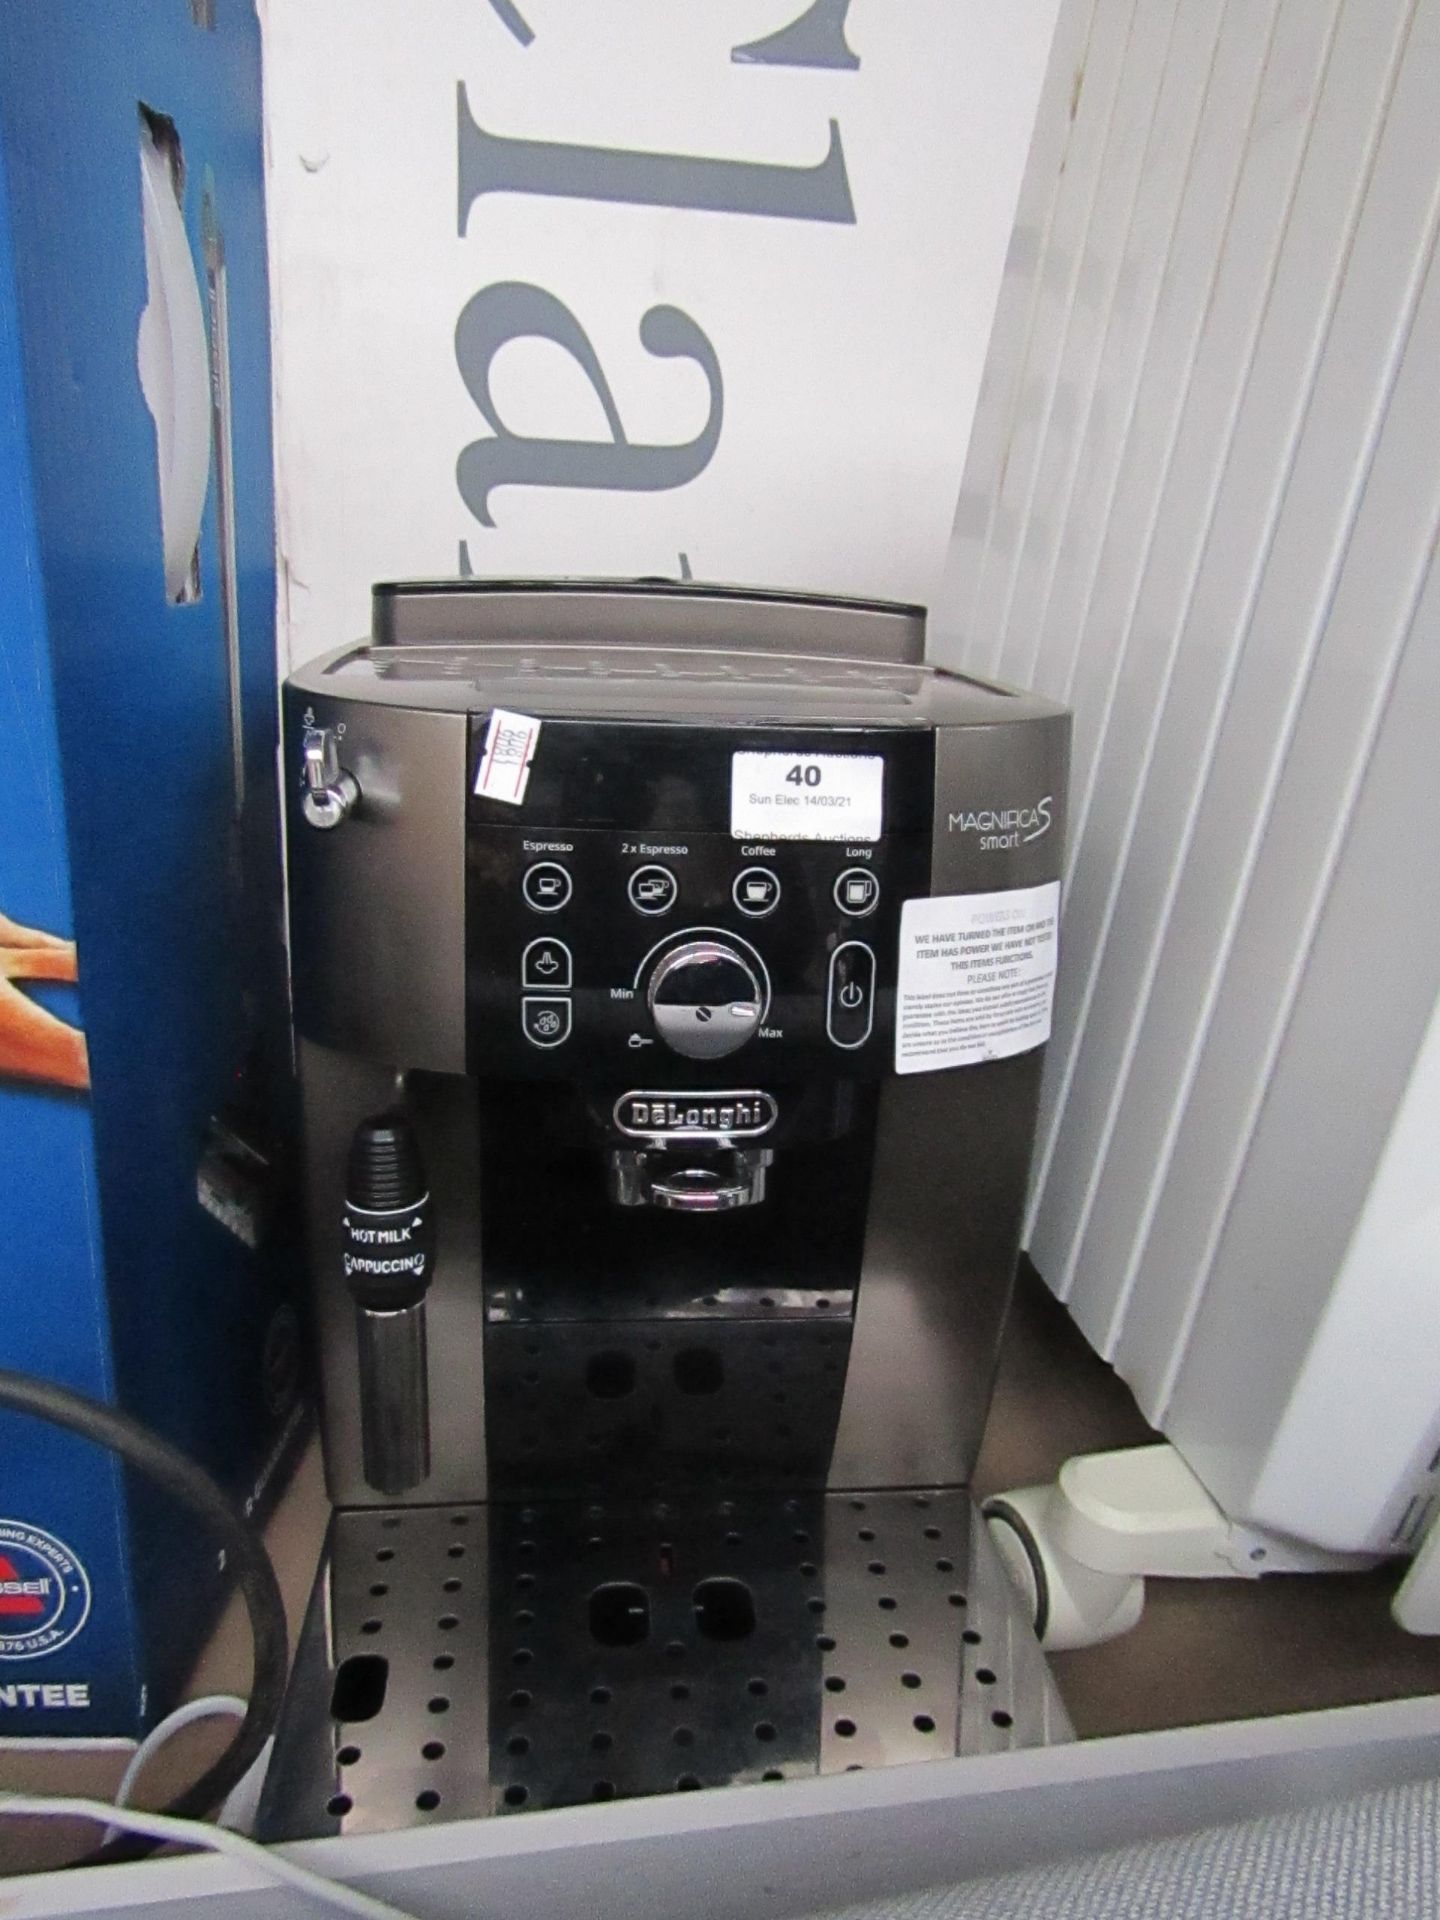 Delonghi Magnifica S bean to cup coffee machine, powers on but not tested all functions. RRP £349.